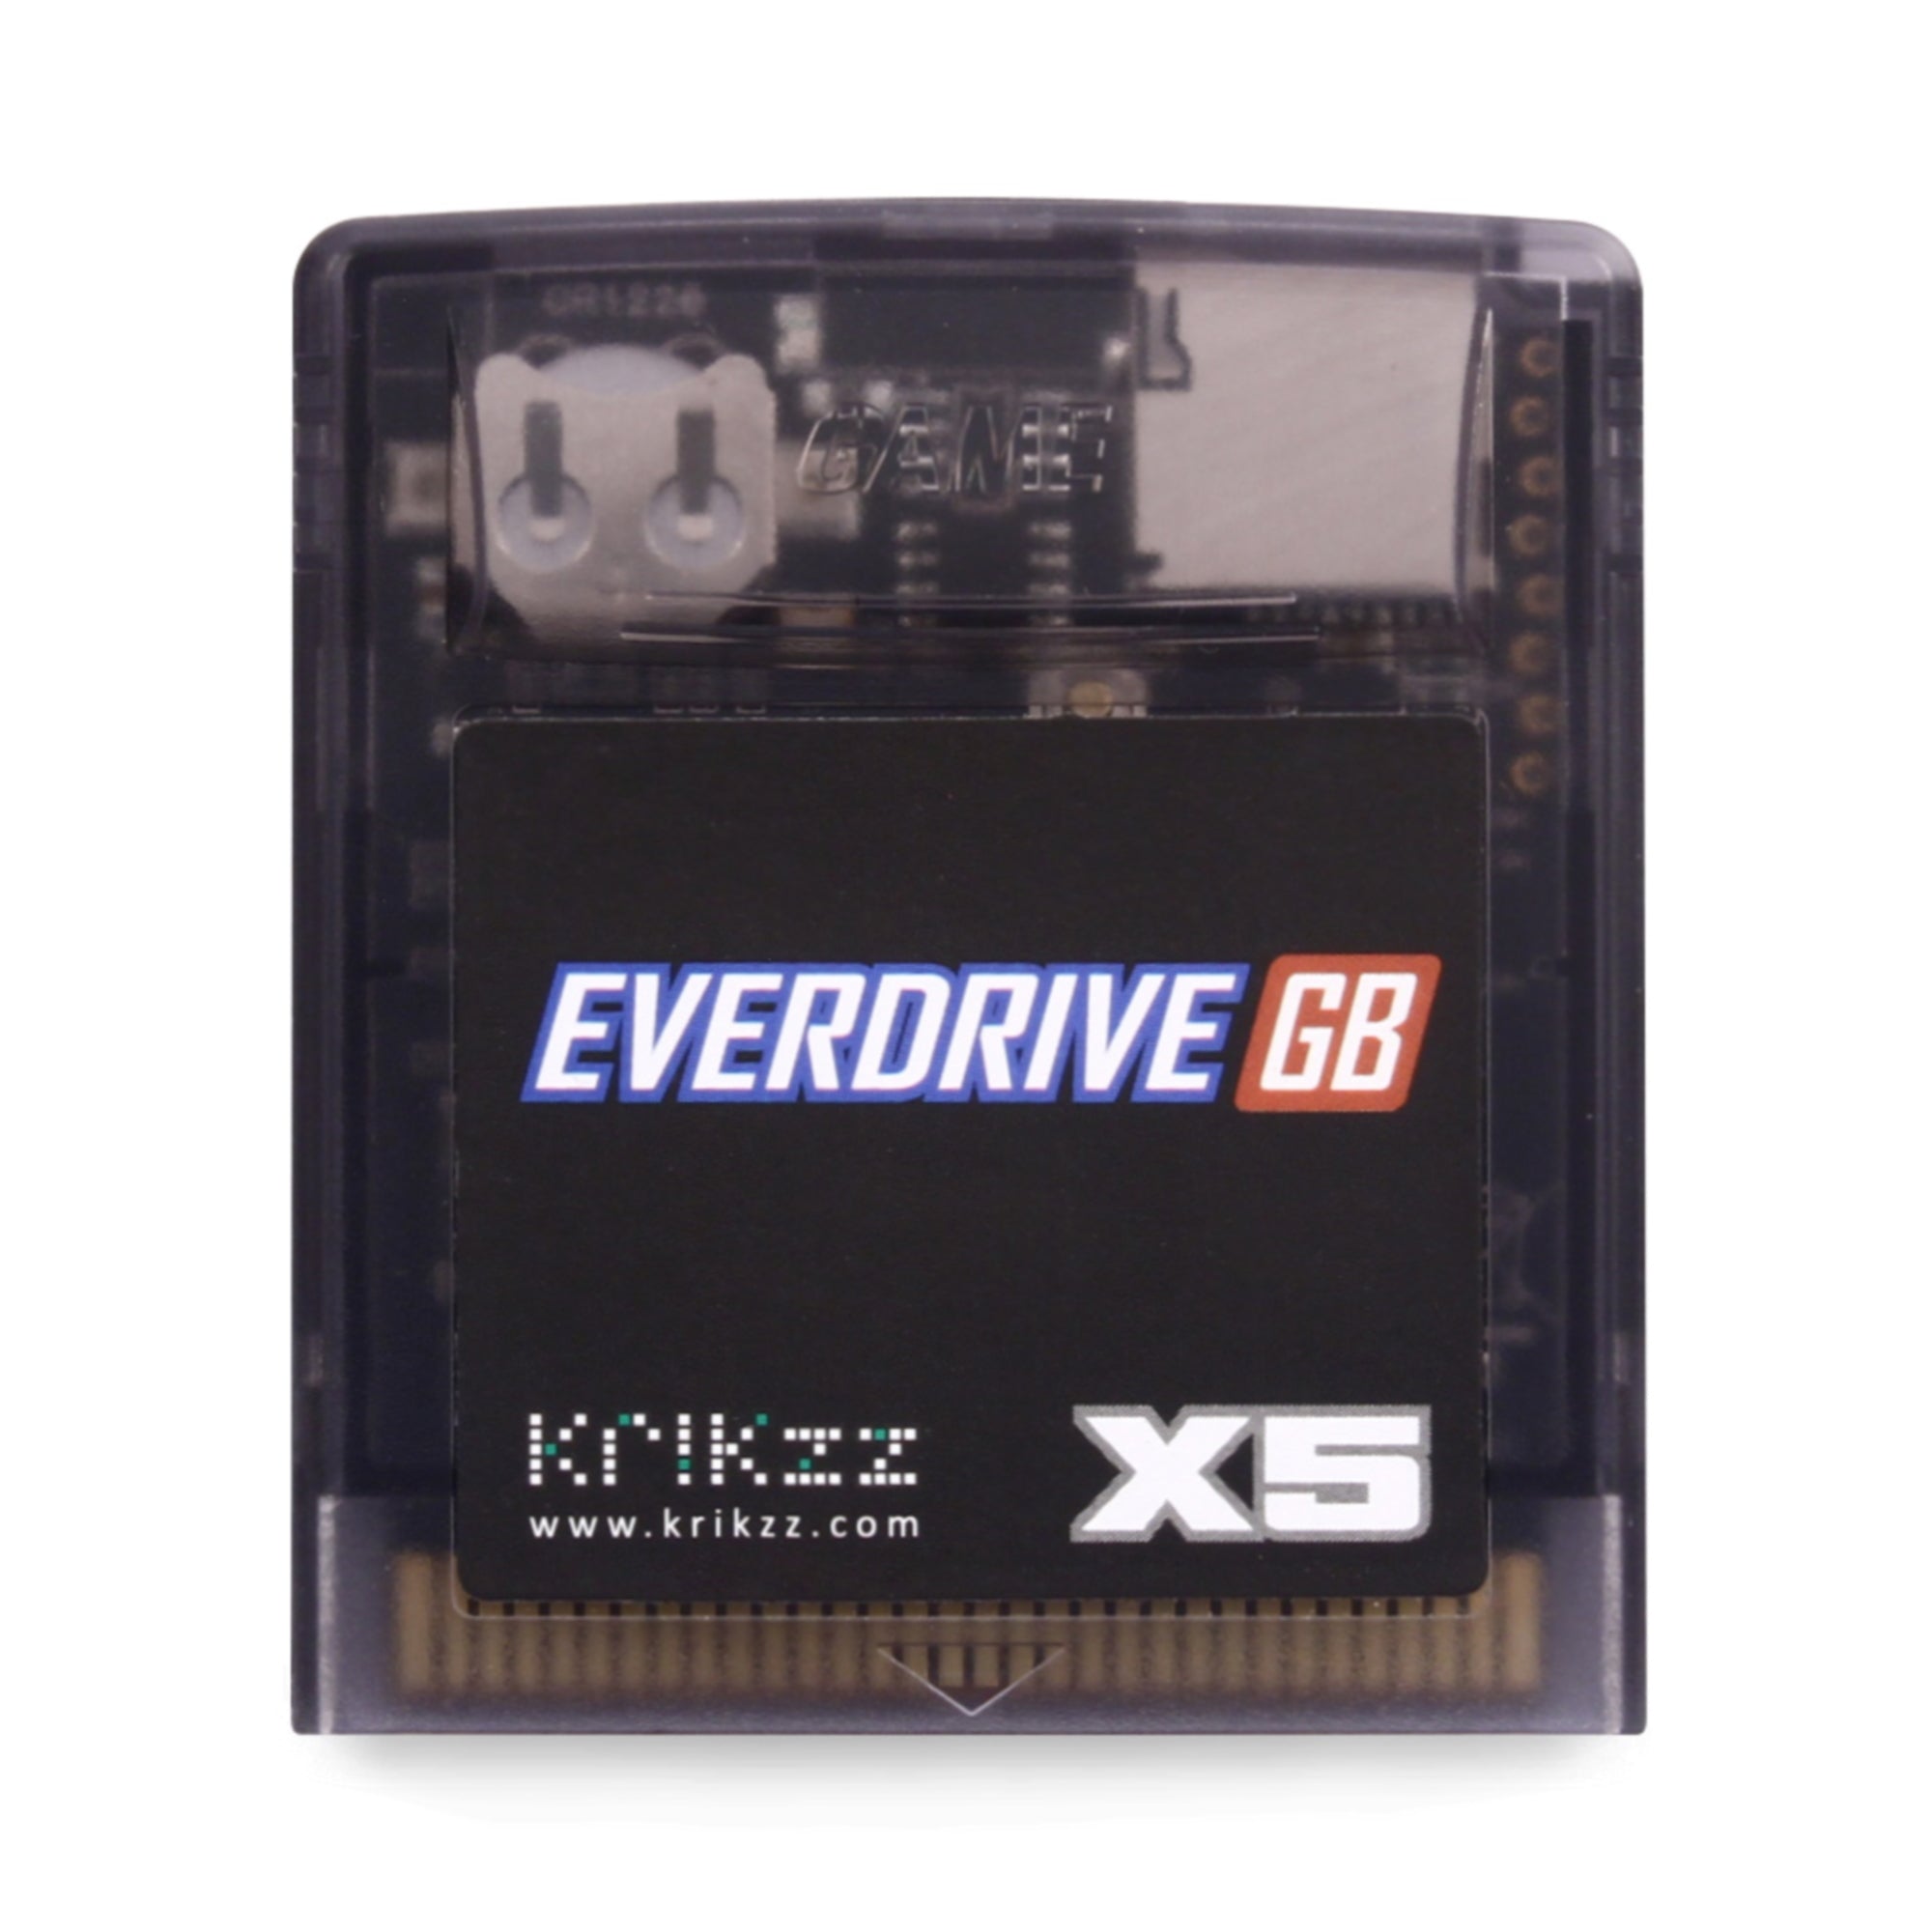 Everdrive GB X5 - Frosted Black – EverdriveStore.com